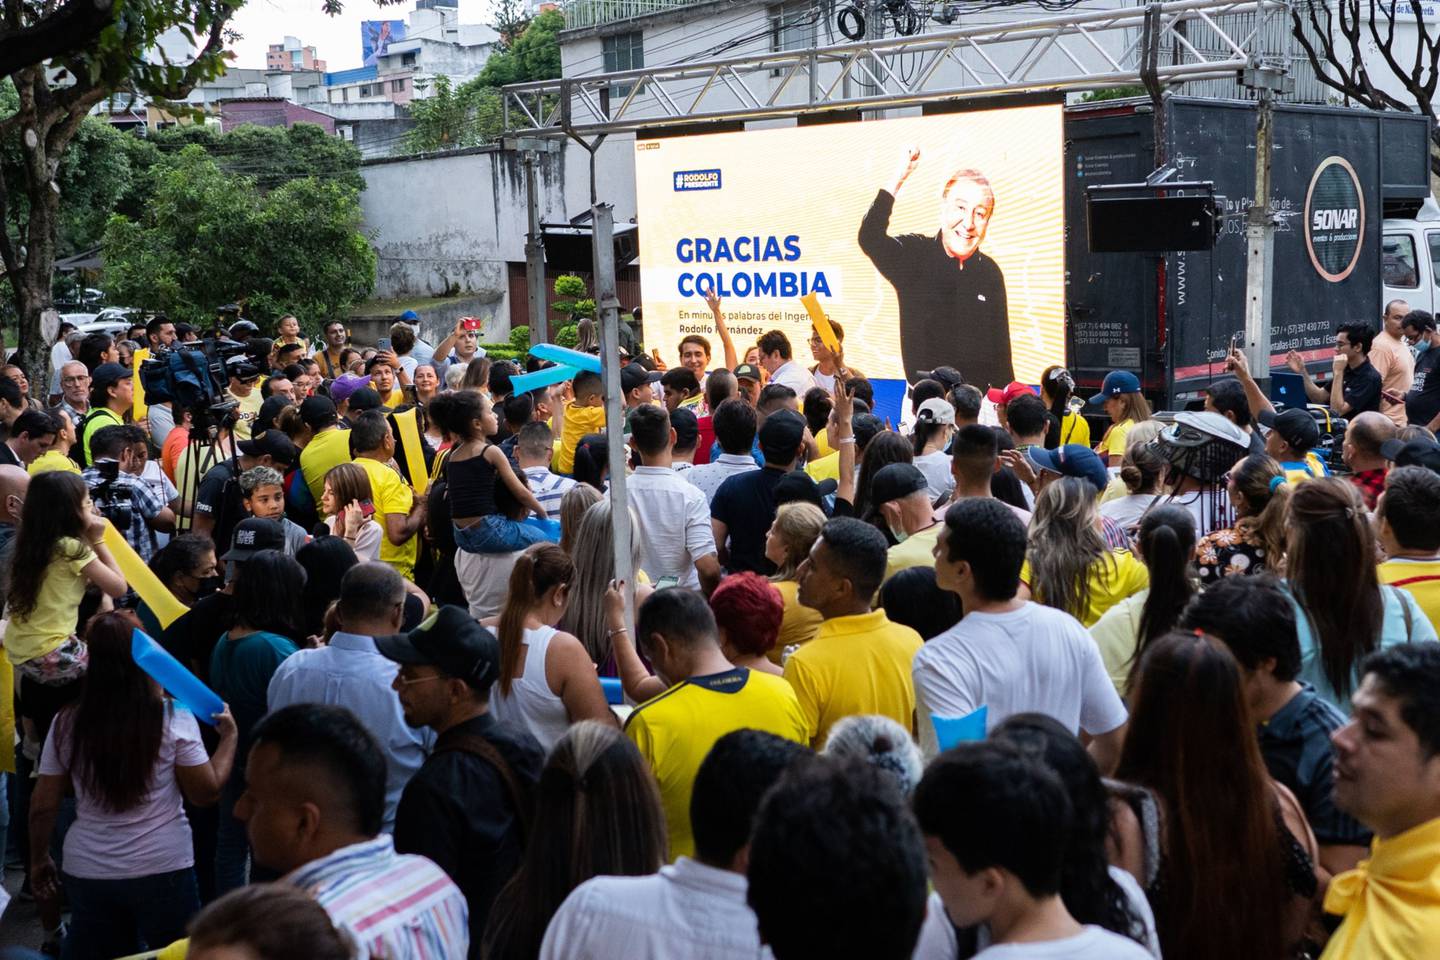 Supporters of Rodolfo Hernandez, independent presidential candidate, gather during an election night rally following the first-round presidential election in Bucaramanga, Colombia, on Sunday, May 29, 2022. Colombia is heading to a presidential runoff between leftist former guerrilla Gustavo Petro and anti-establishment outsider Rodolfo Hernandez, who defied polls to defeat a conservative candidate backed by traditional parties. Photographer: Natalia Ortiz Mantilla/Bloombergdfd